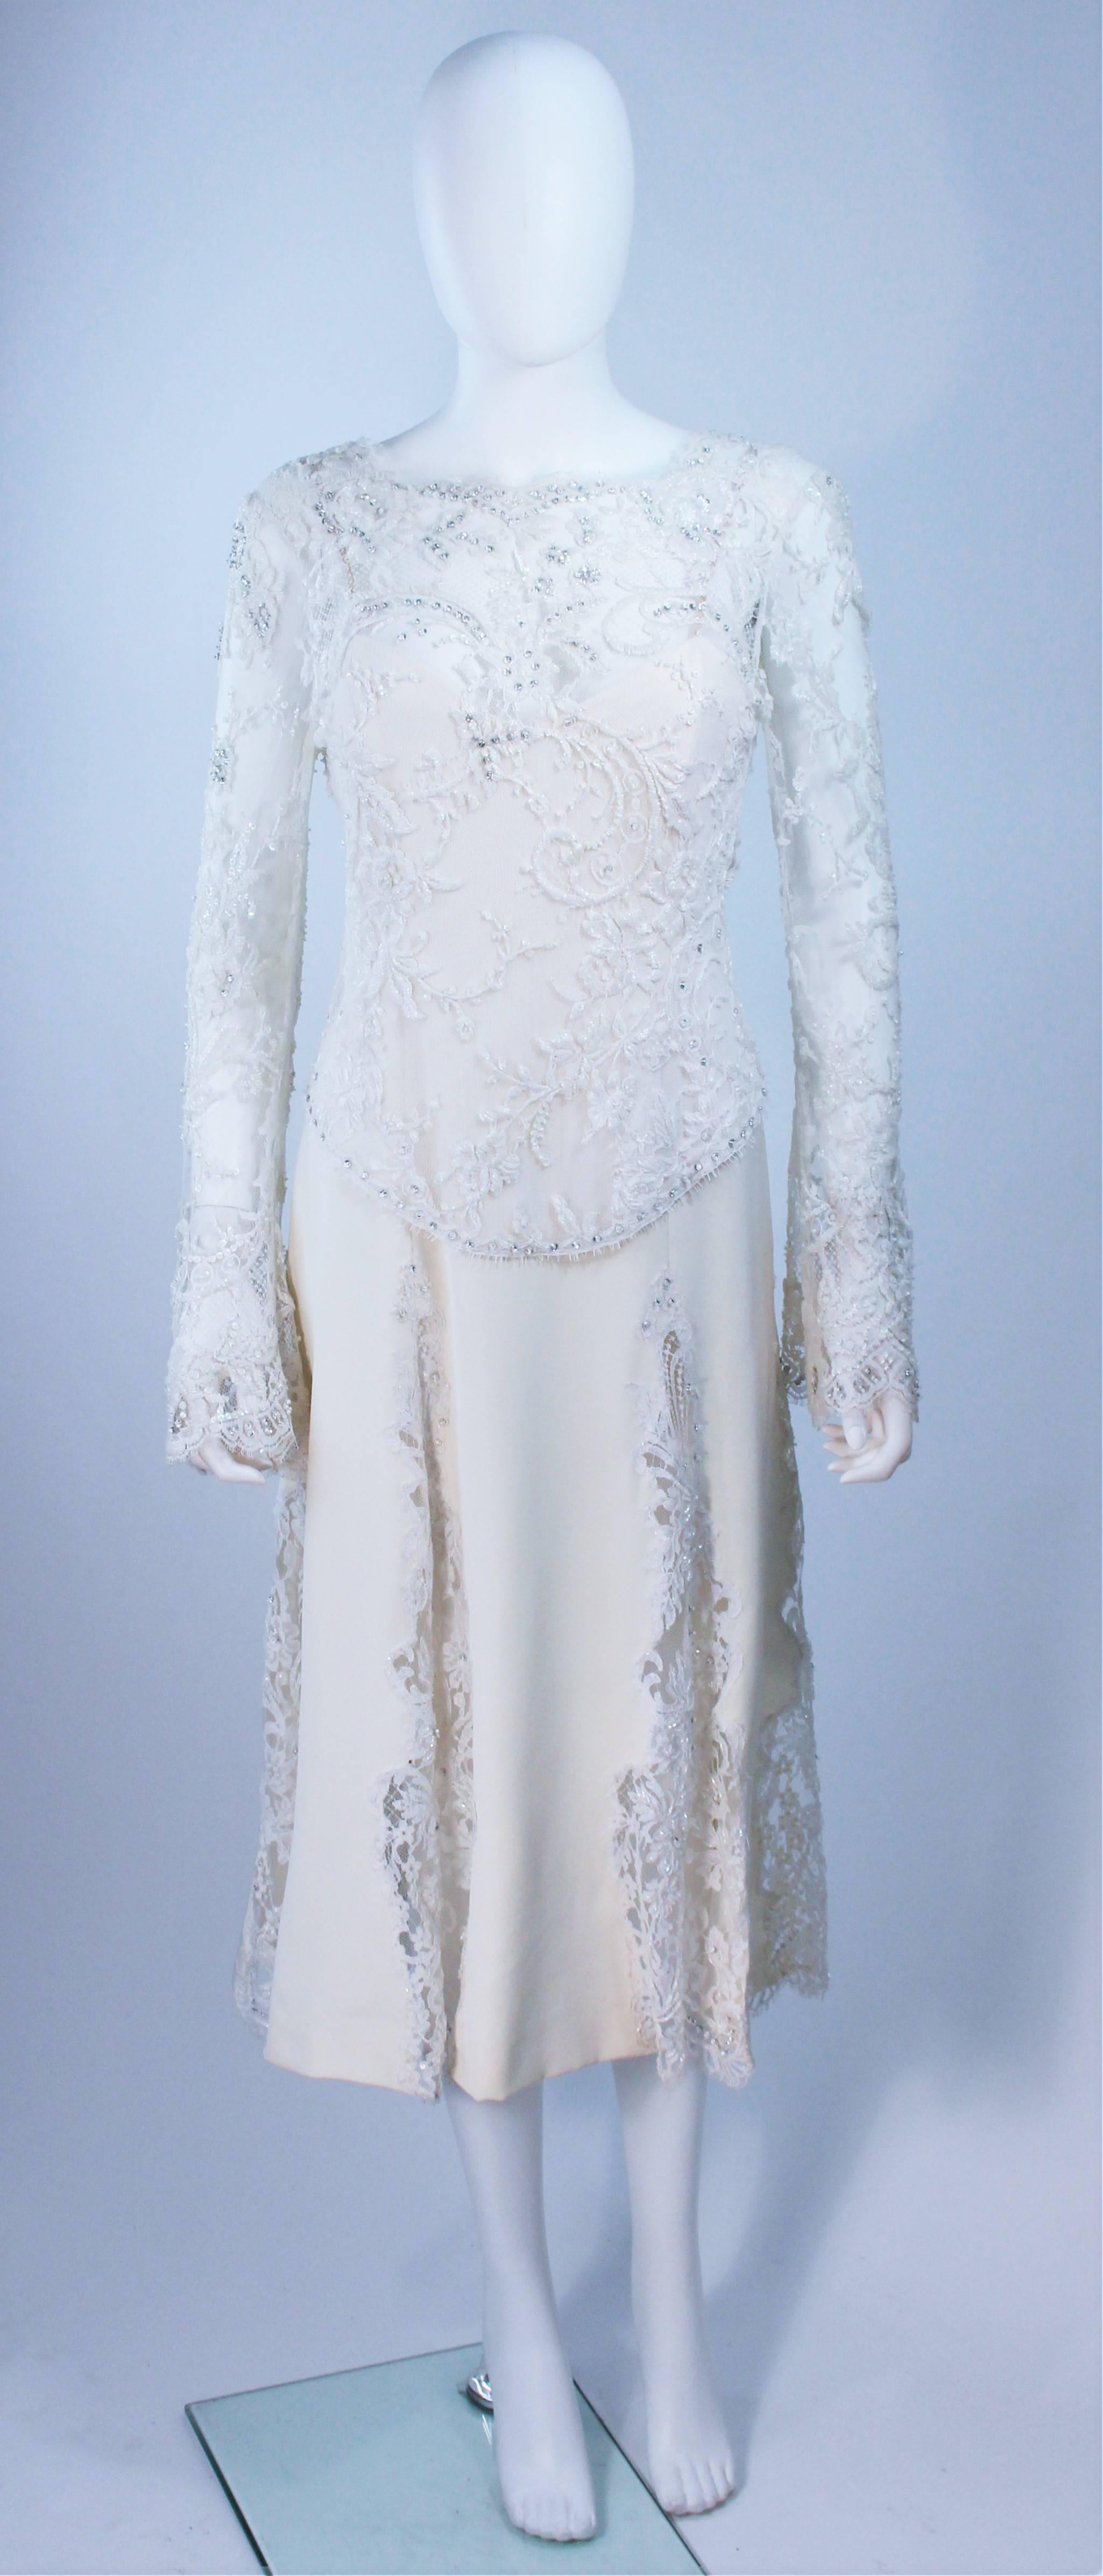  This Fe Zandi  dress is composed of a white silk and lace combination. The lace features rhinestone and bead applique. There is a center back zipper closure. In excellent vintage condition. 

  **Please cross-reference measurements for personal